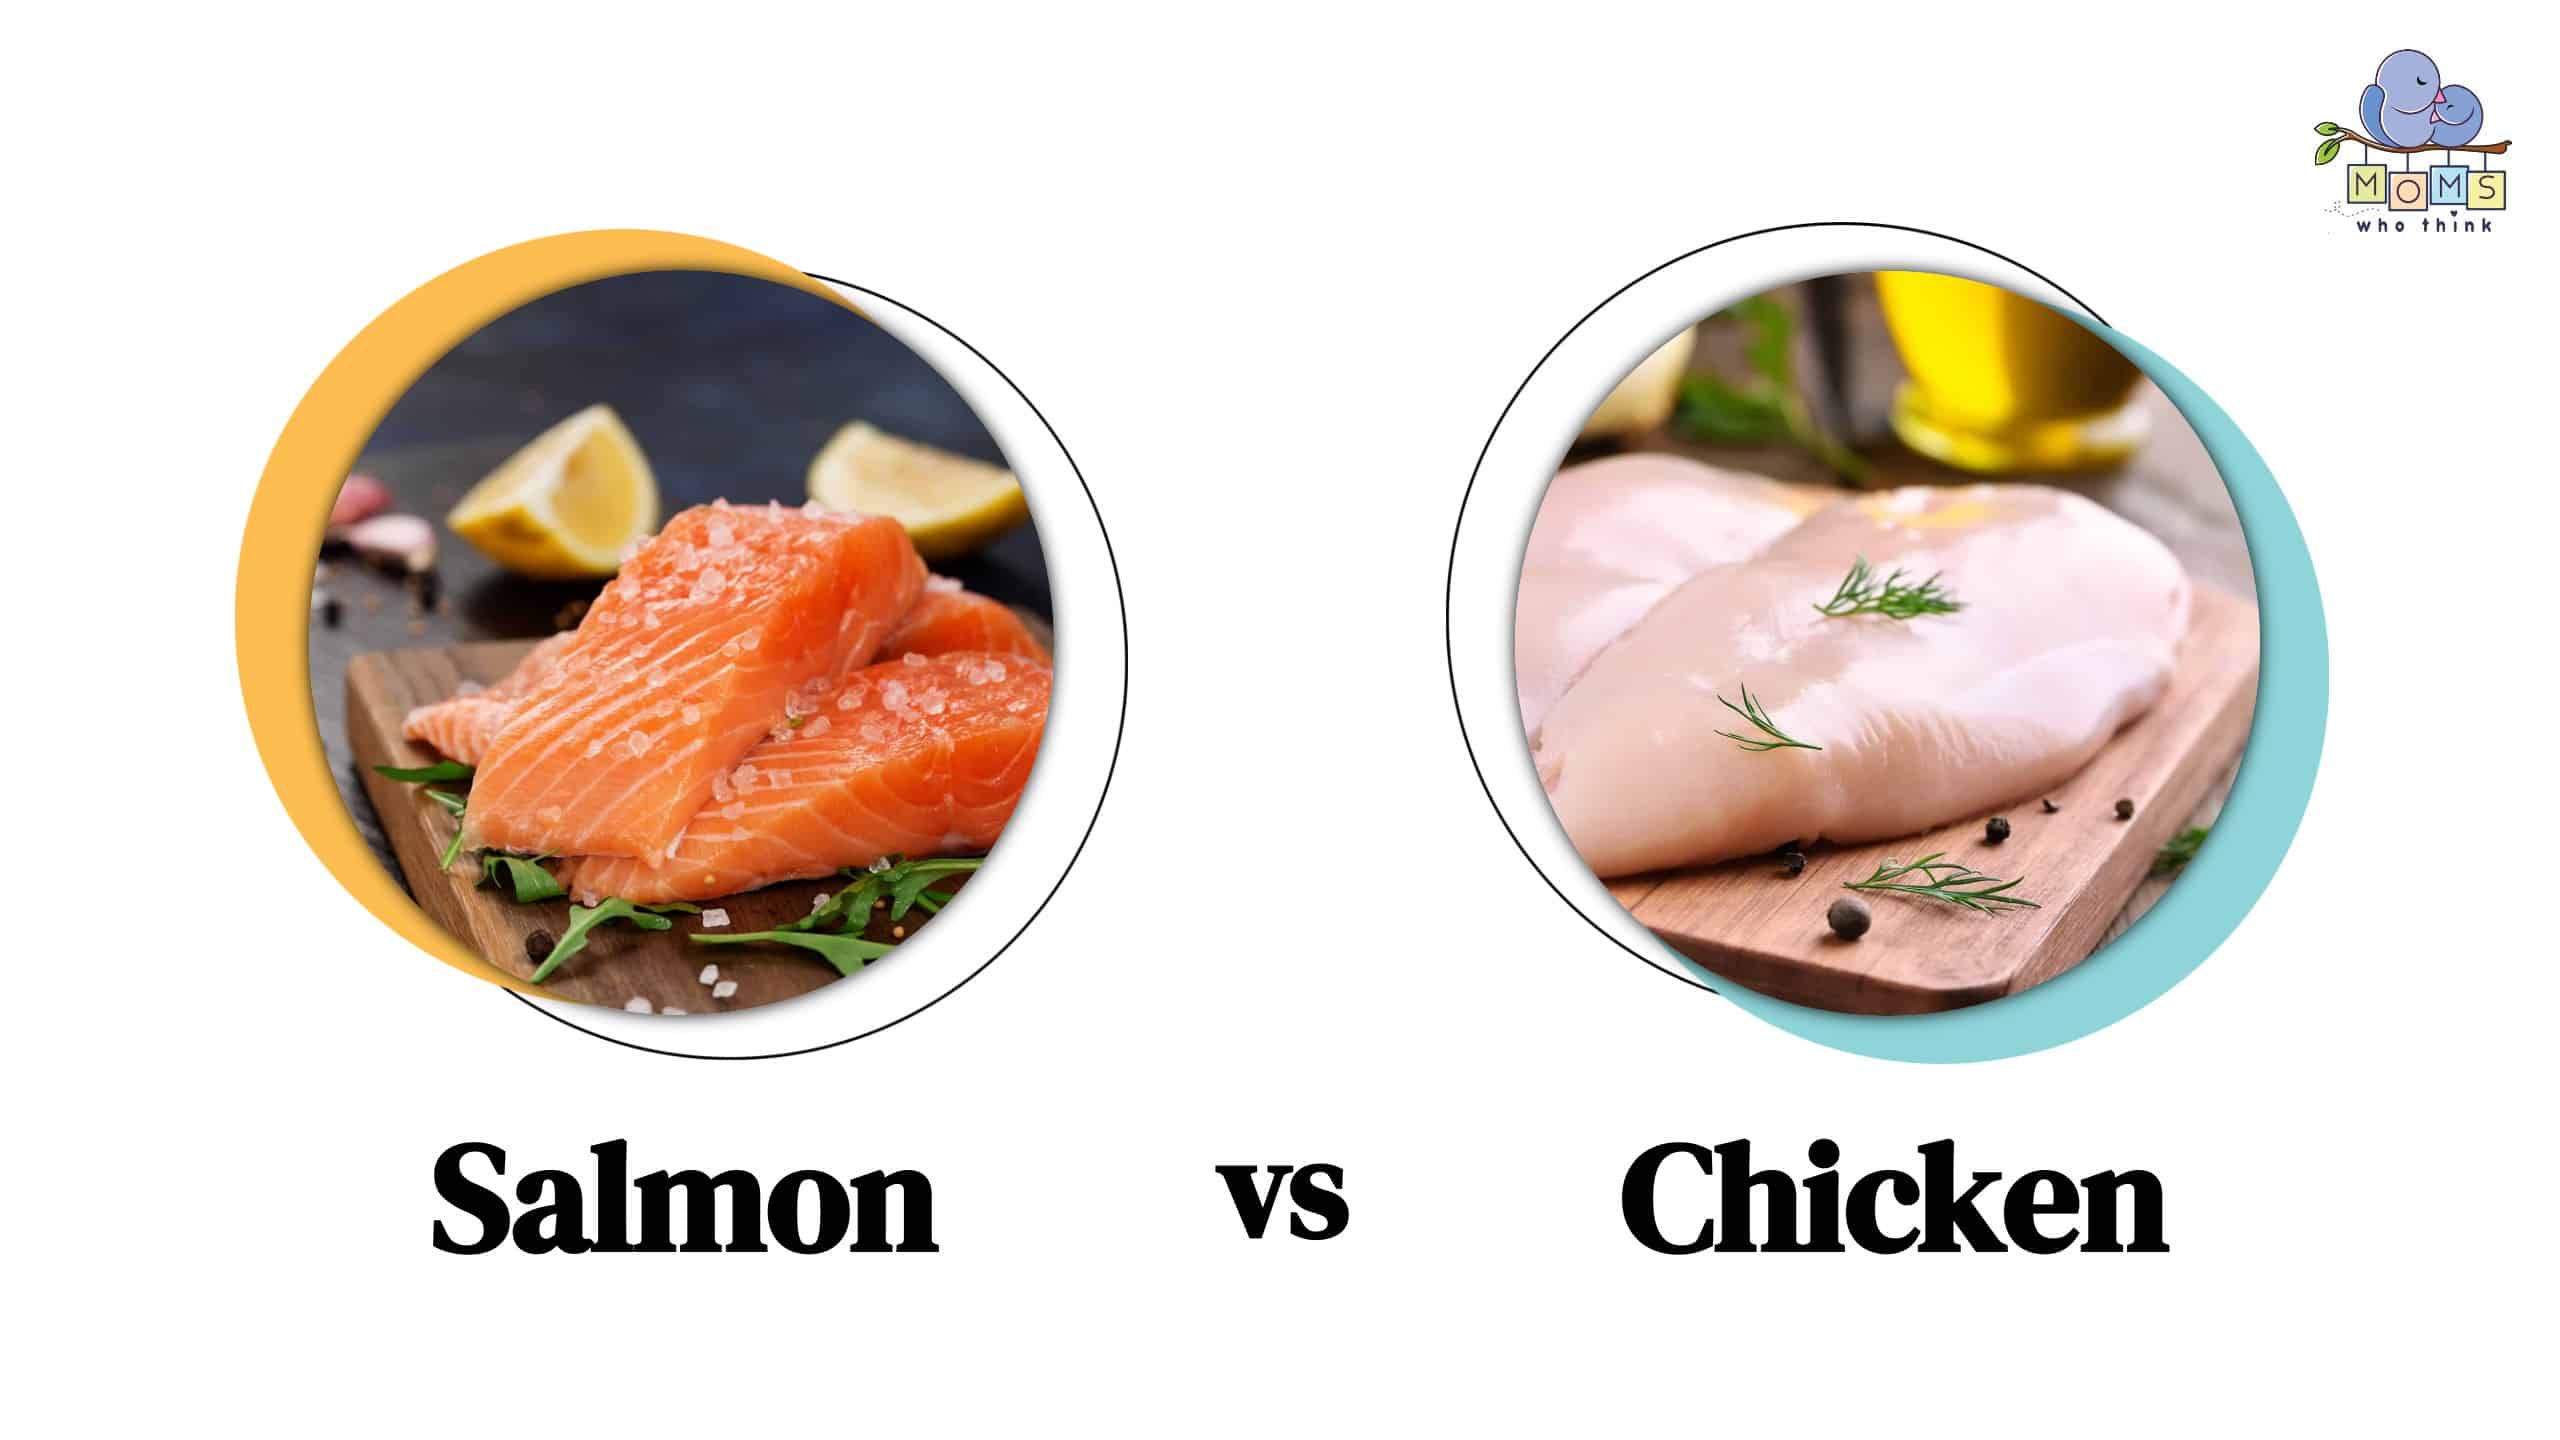 Salmon vs. Chicken: Which is Healthier & How to Cook Each